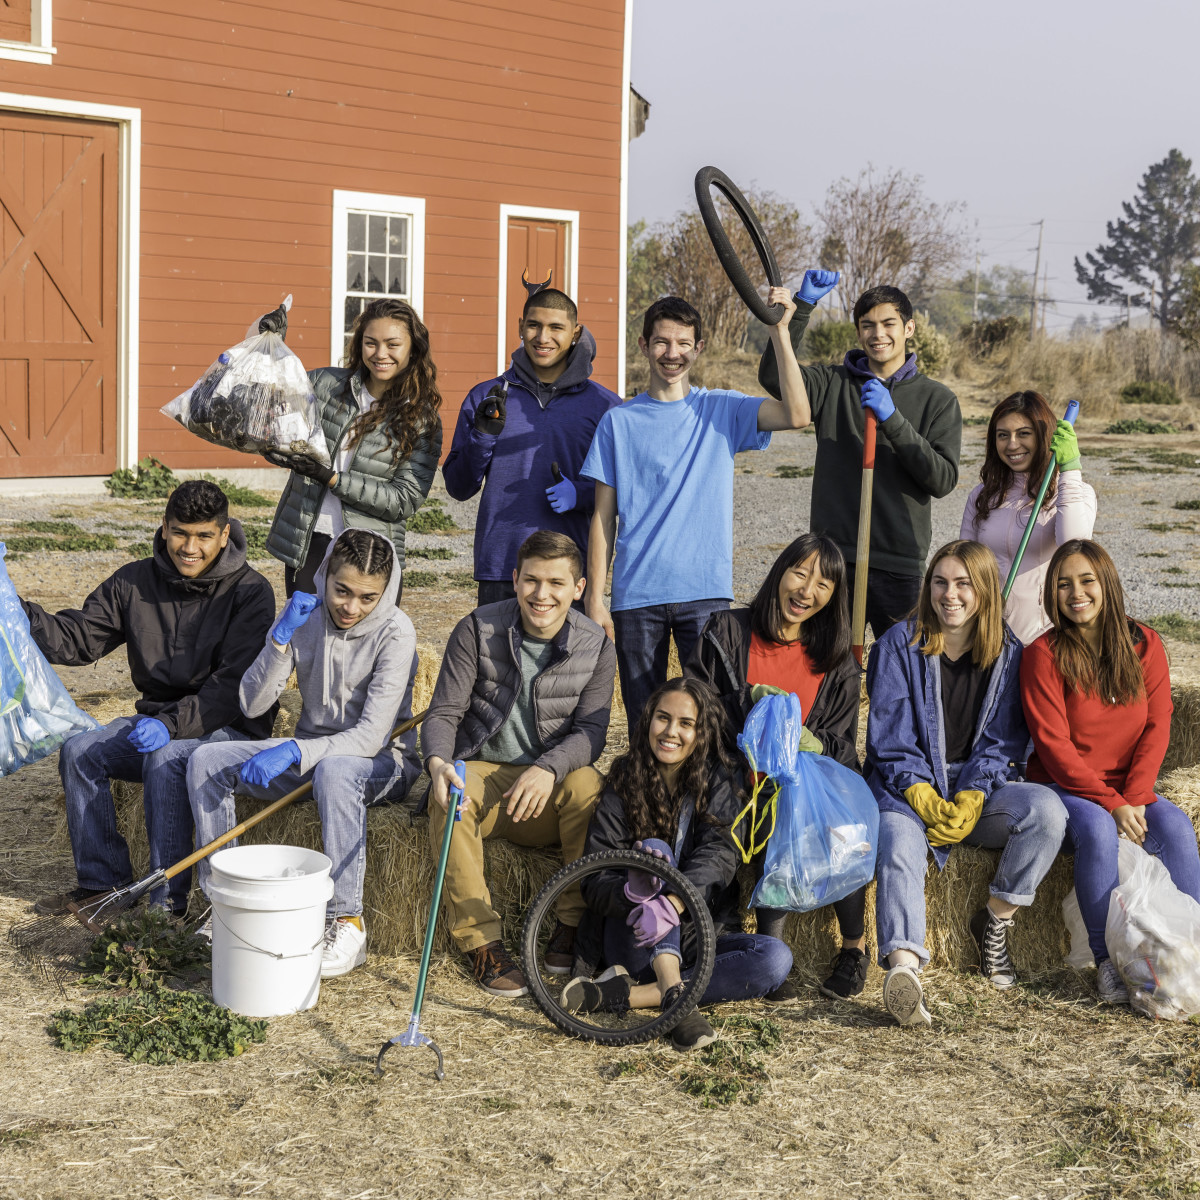 145+ Community Service Ideas for Students, Families, and Individuals